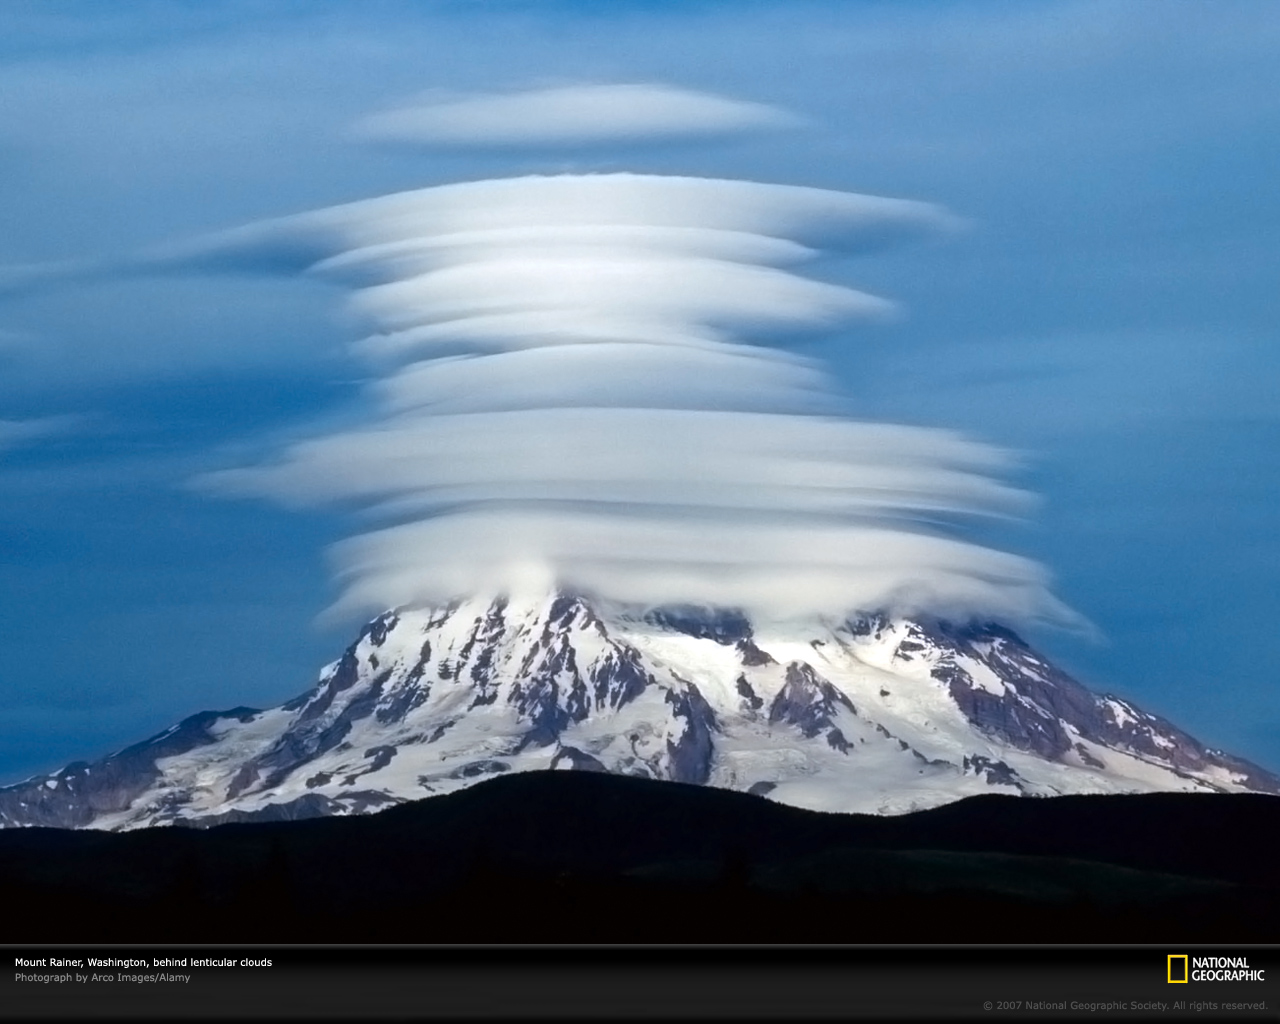 http://www.thelivingmoon.com/43ancients/04images/Earth/Clouds/Lenticular18.jpg